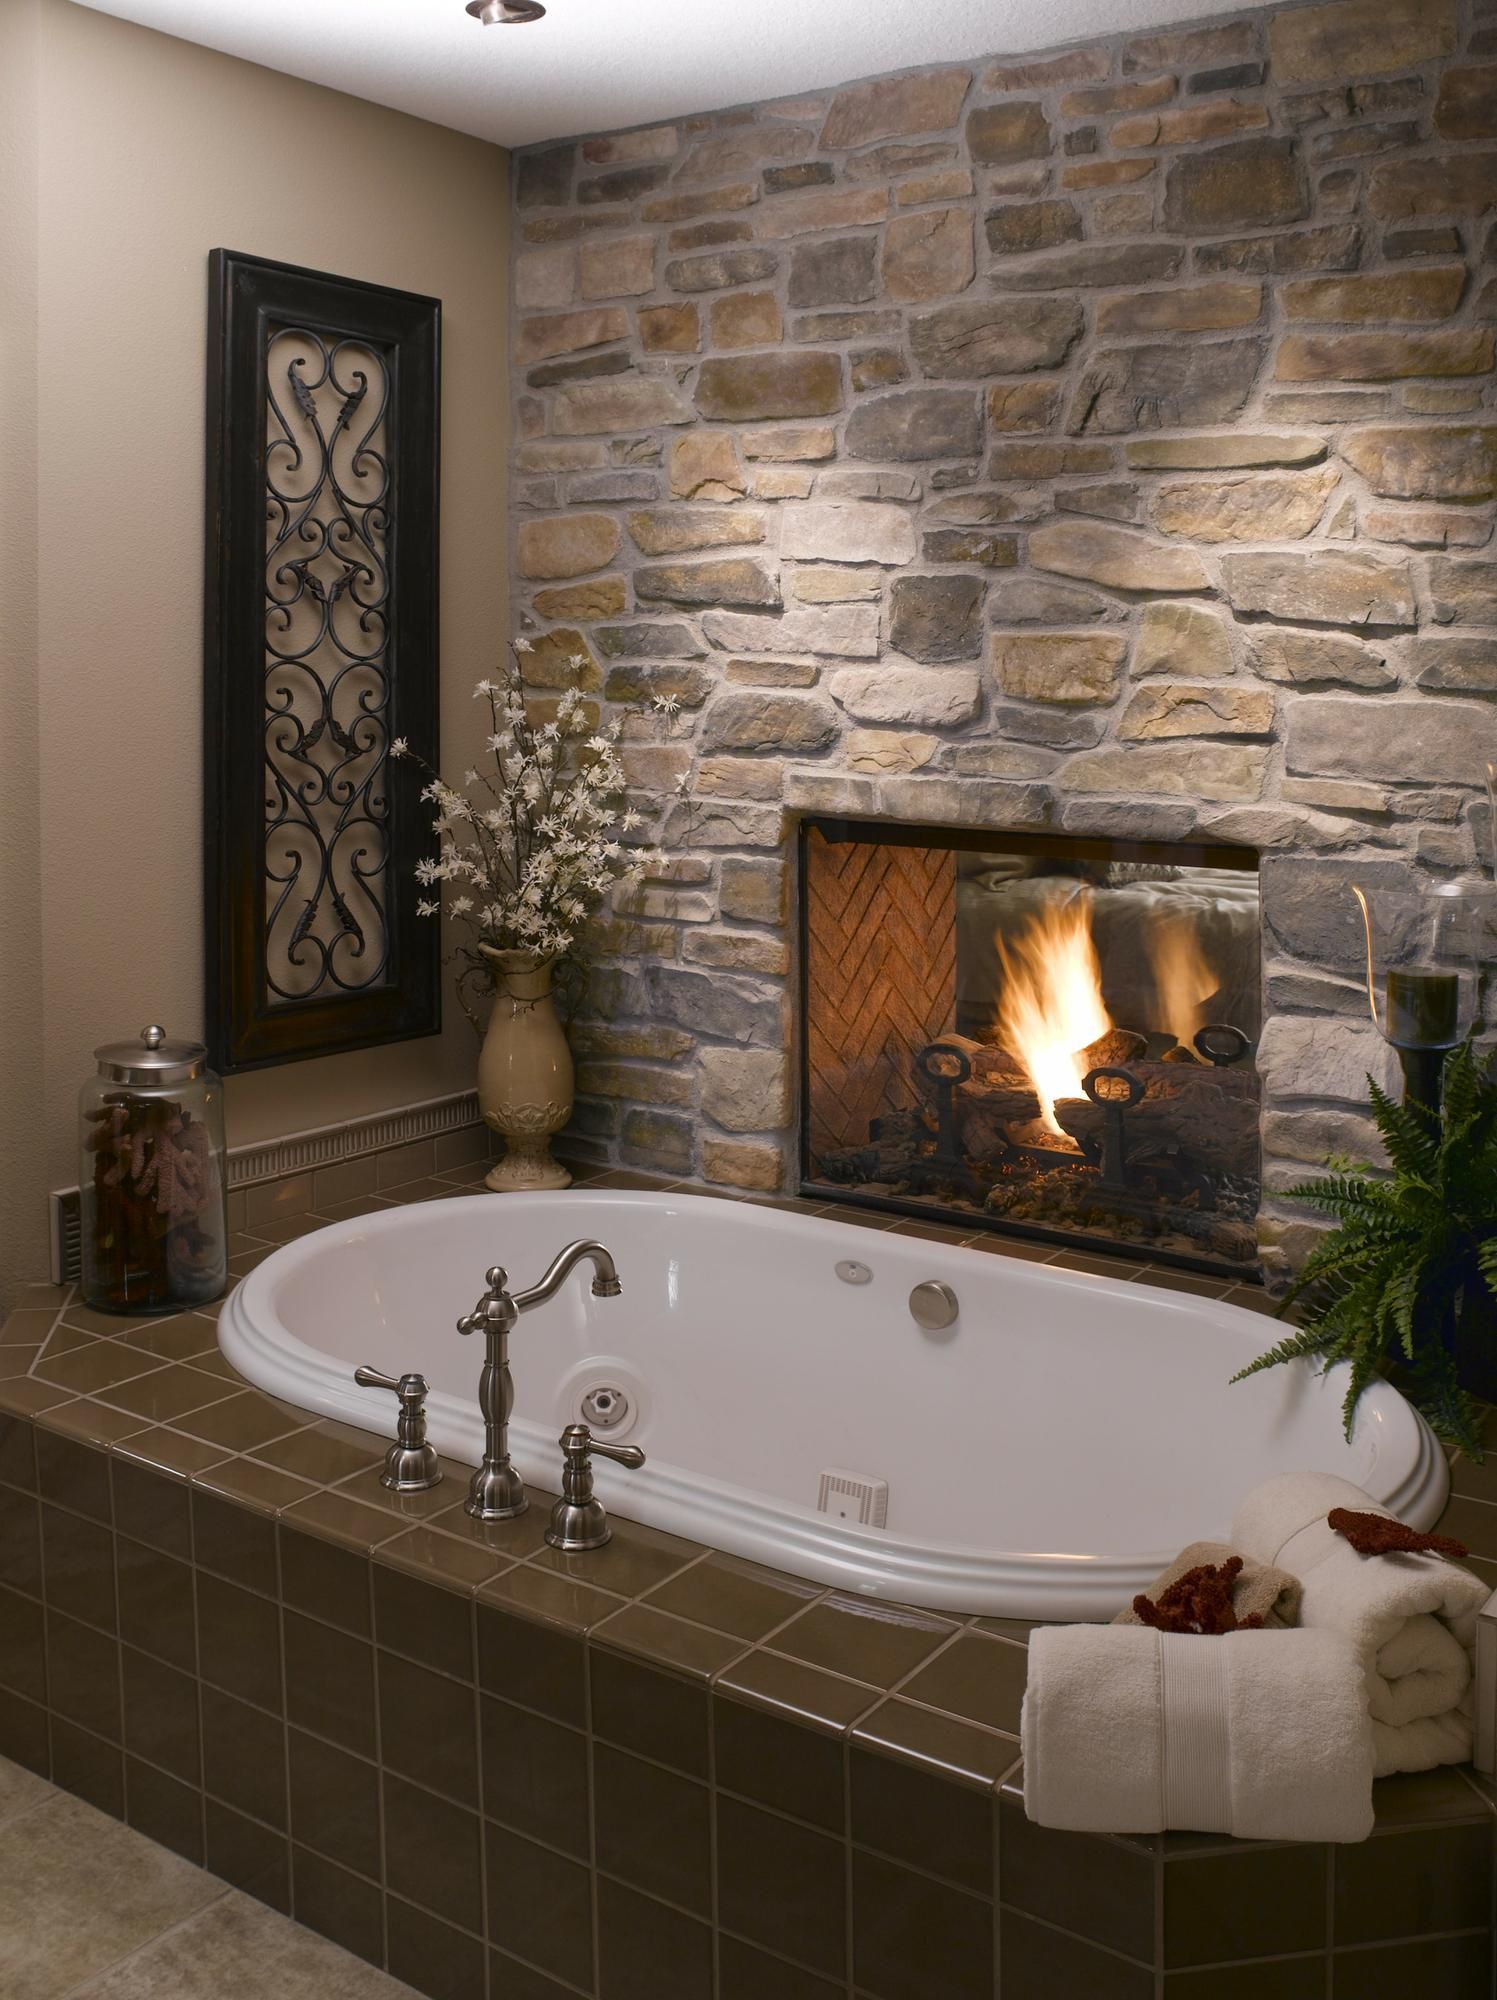 Fireplace between the master bedroom and tub. Yes please!  On vacay I got to tak